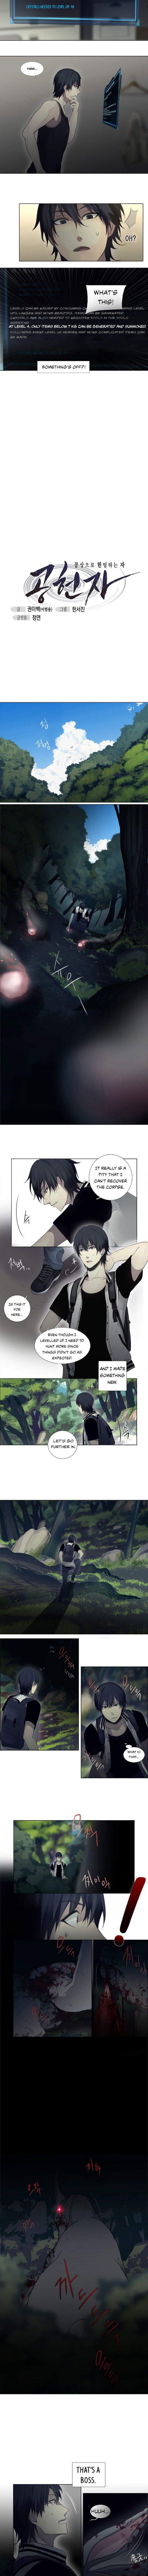 Gong Heon Ja Chapter 5 page 4